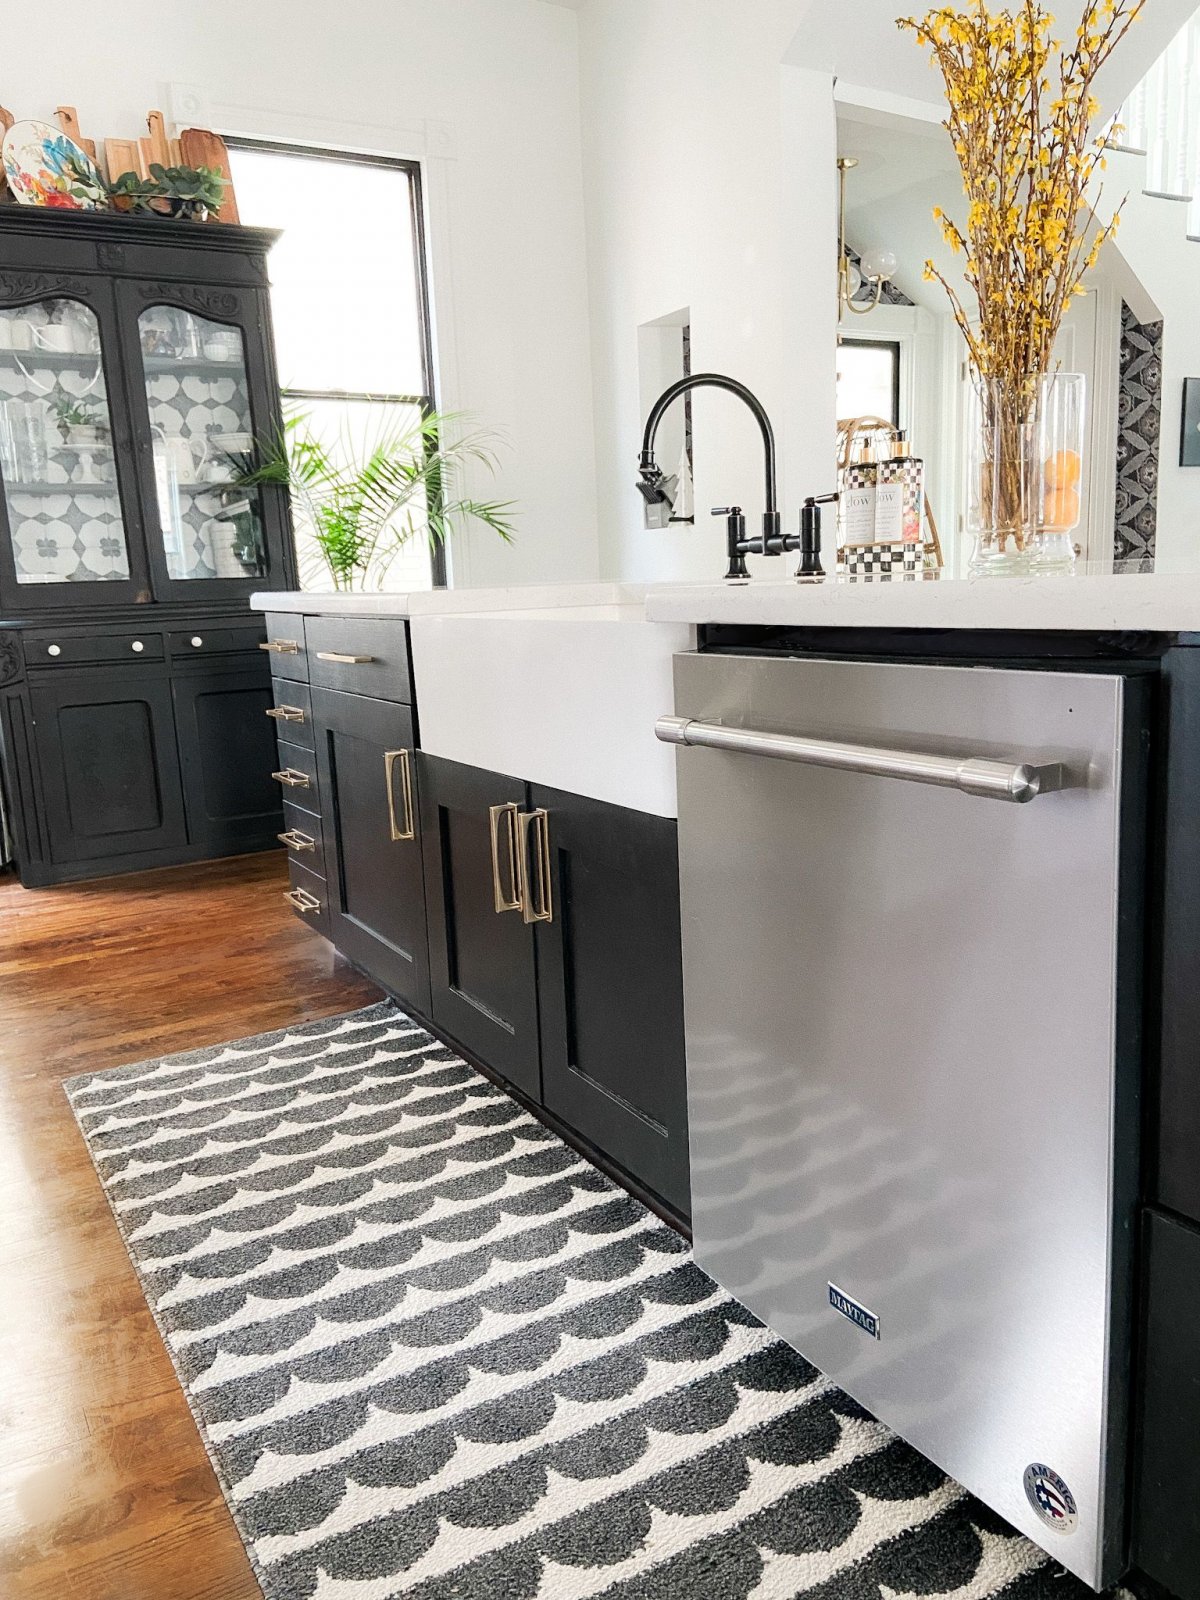 #ad SIX reasons we chose our @Maytag dishwasher and free family dishwasher printable to keep your kitchen running smoothly! #Maytag